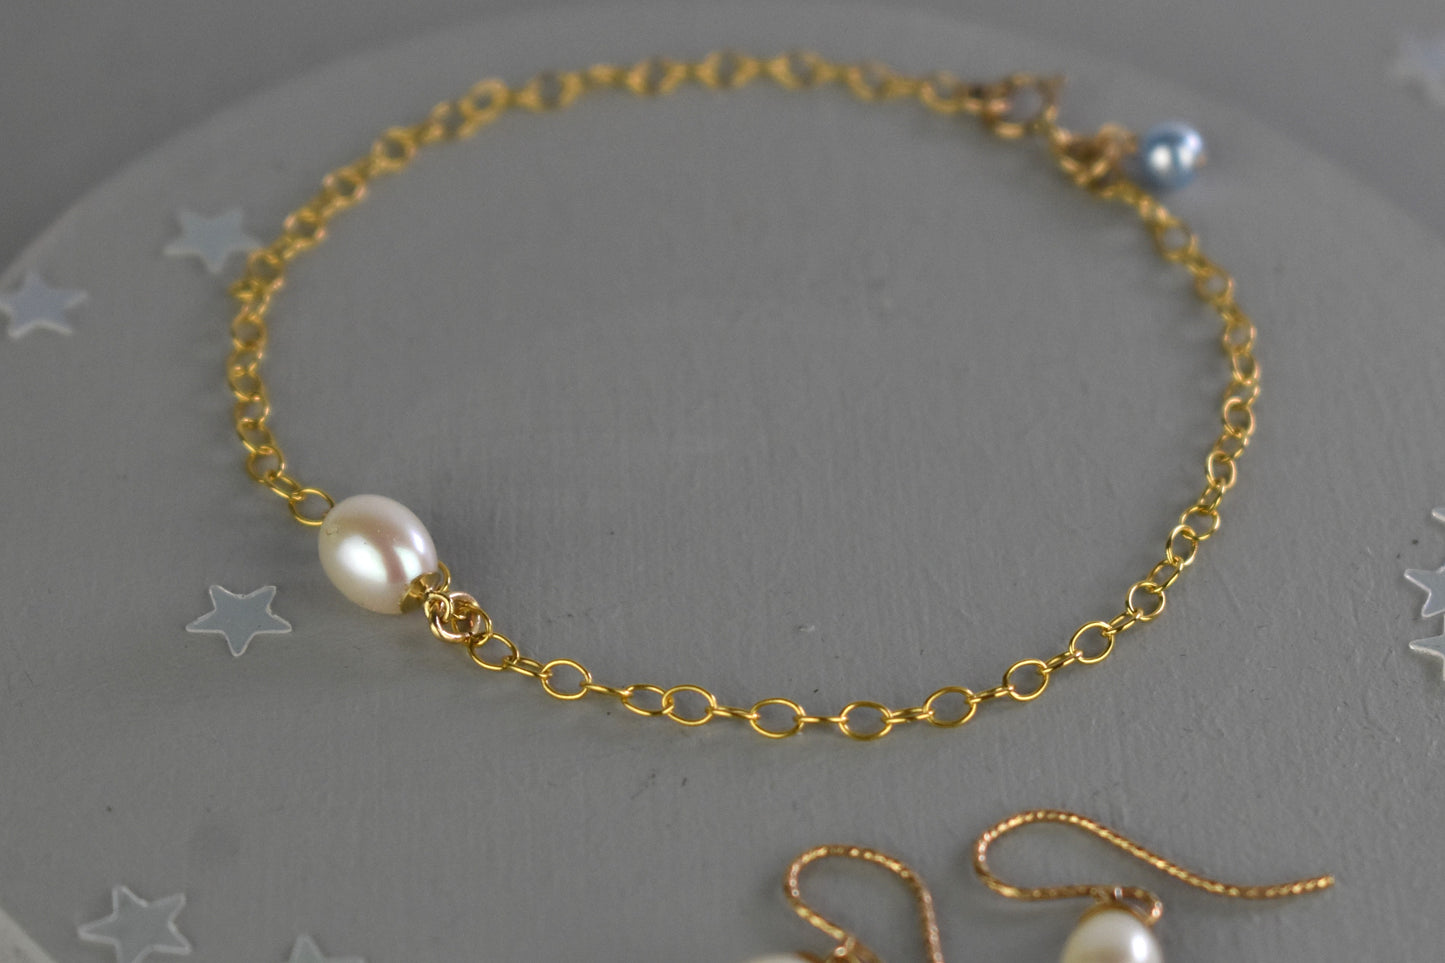 Gold plated freshwater pearl bracelet to match lariat necklace and pearl drop earrings. Freshwater pearl on bracelet and finsished with a tiny blue glass pearl. The perfect Something Blue. 